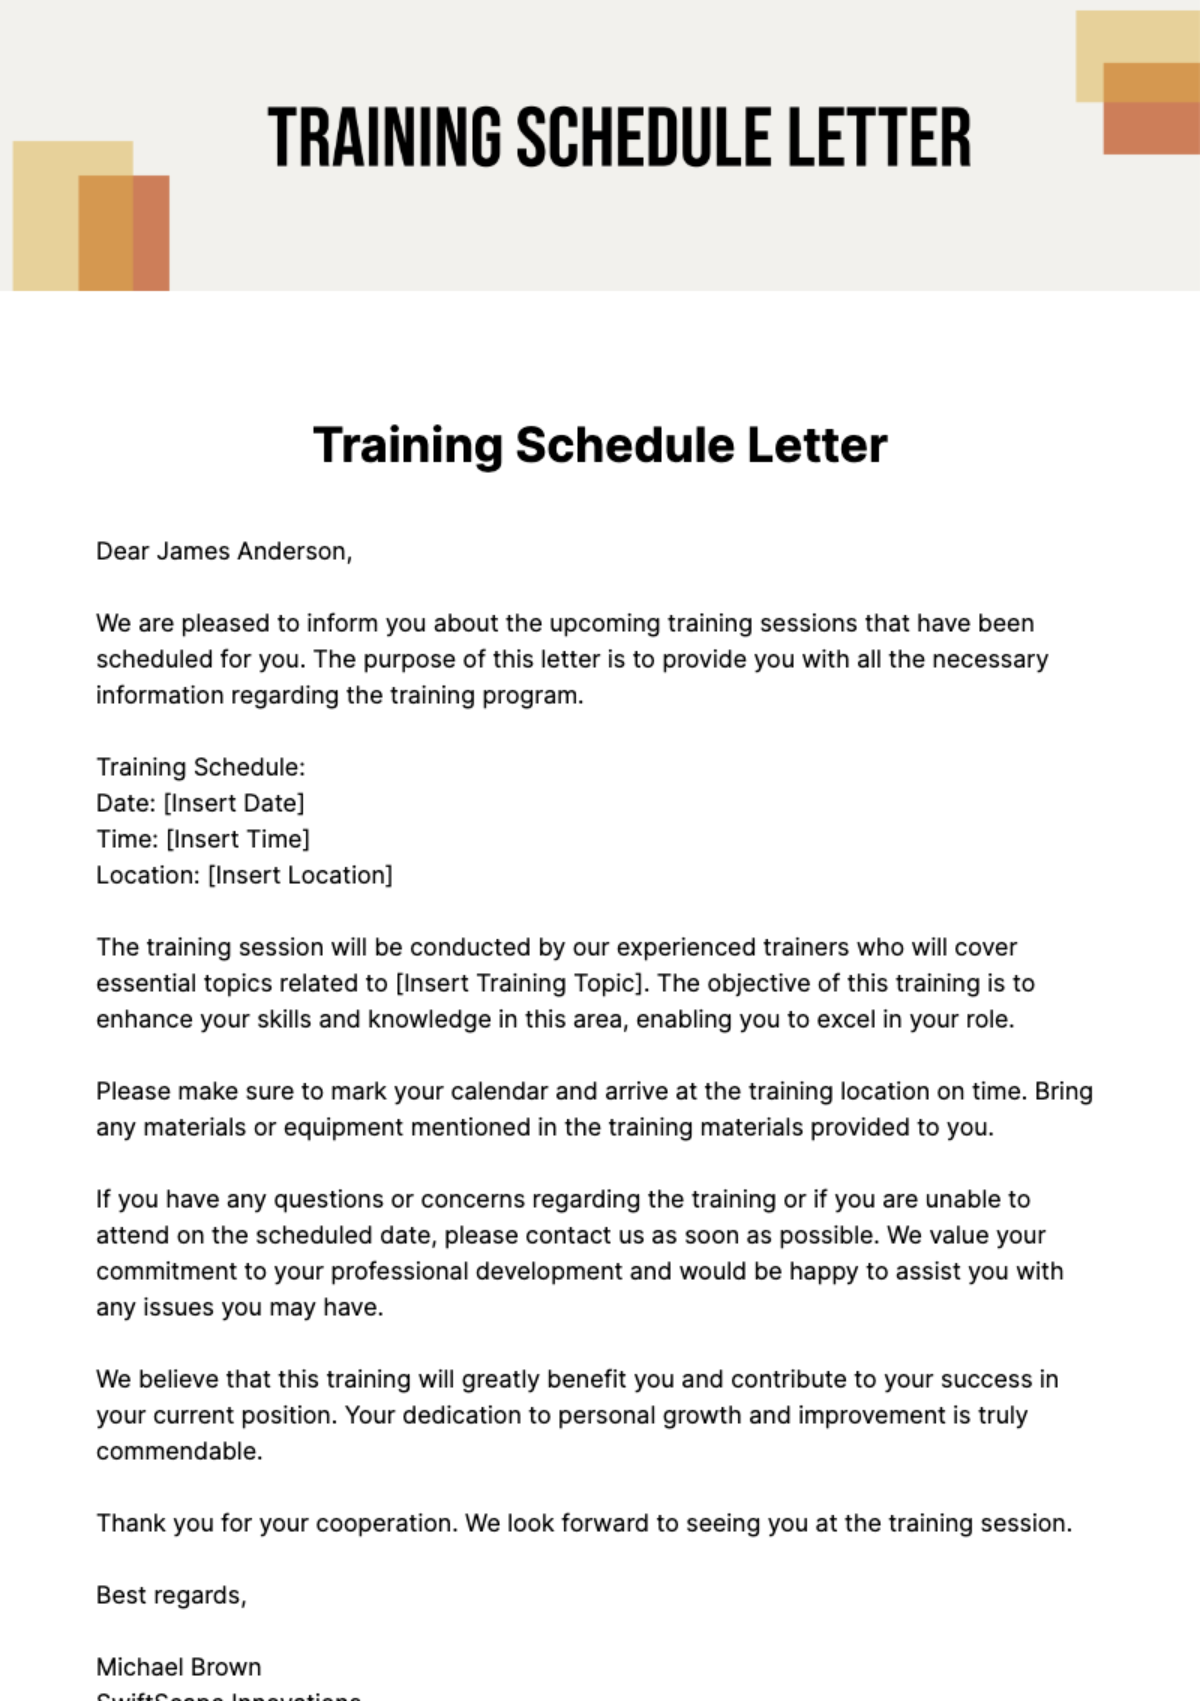 Free Training Schedule Letter Template